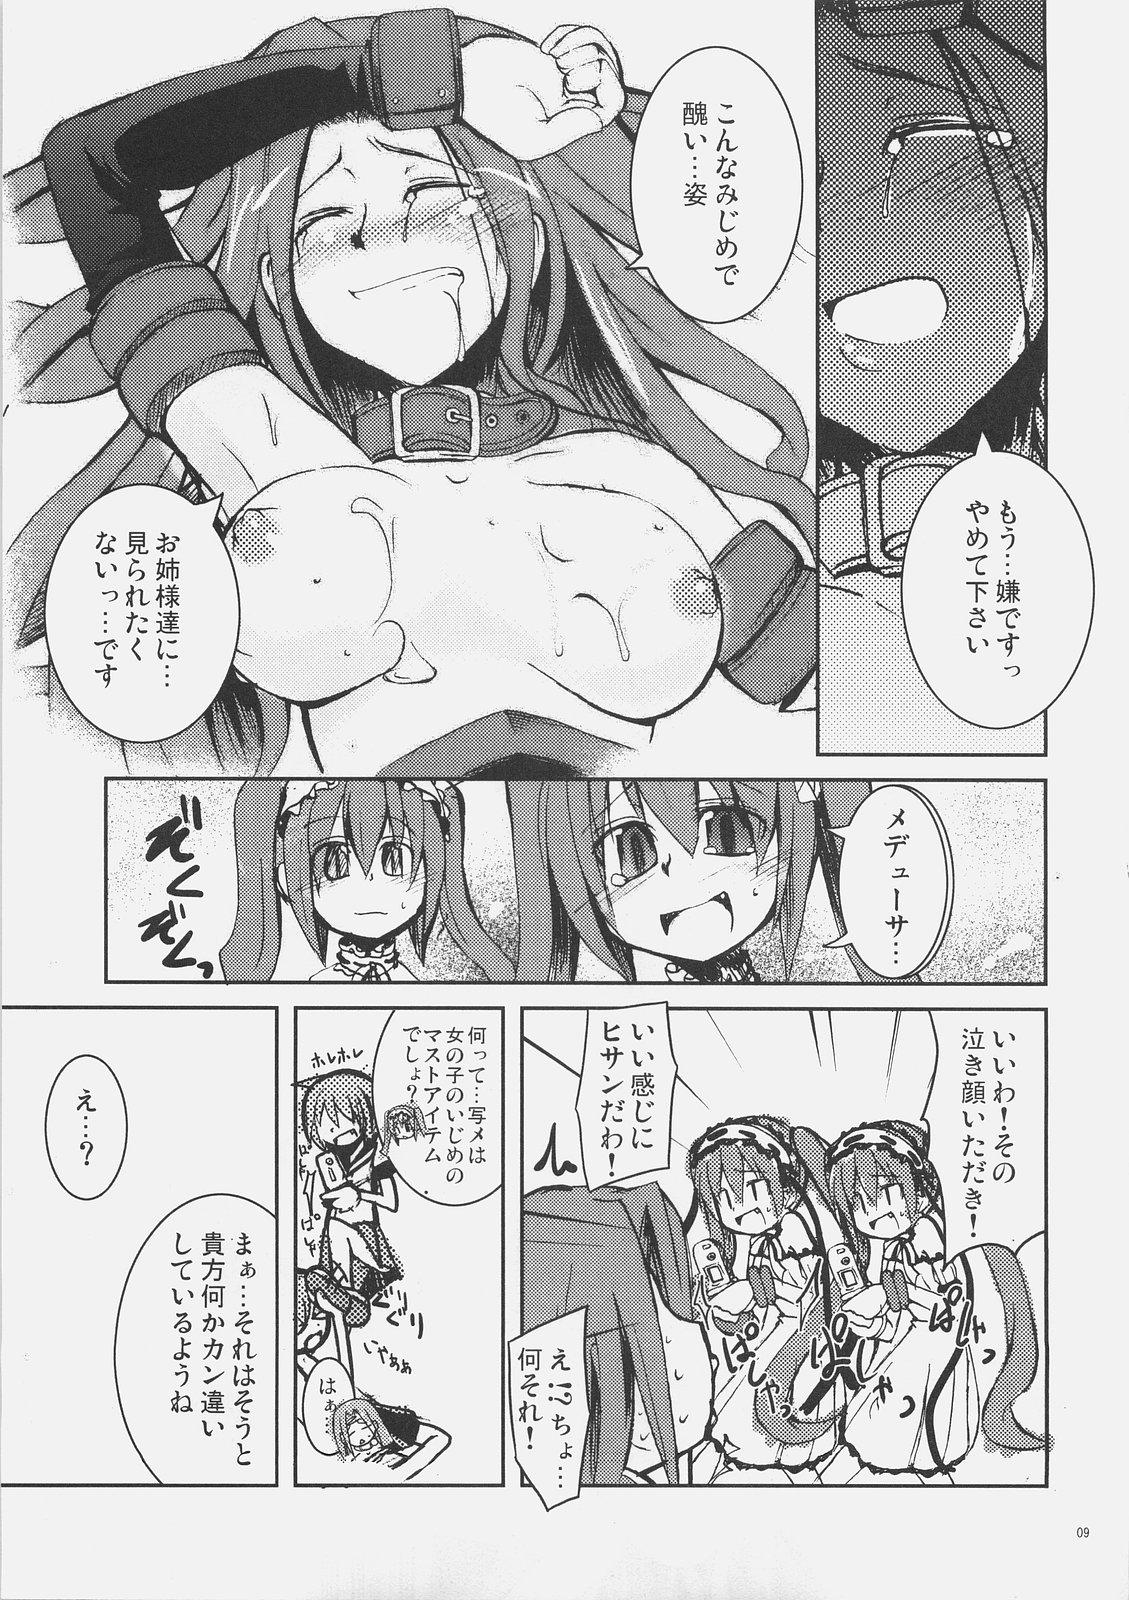 Gay Amateur Candy cutie sadist - Fate stay night 18 Year Old - Page 8